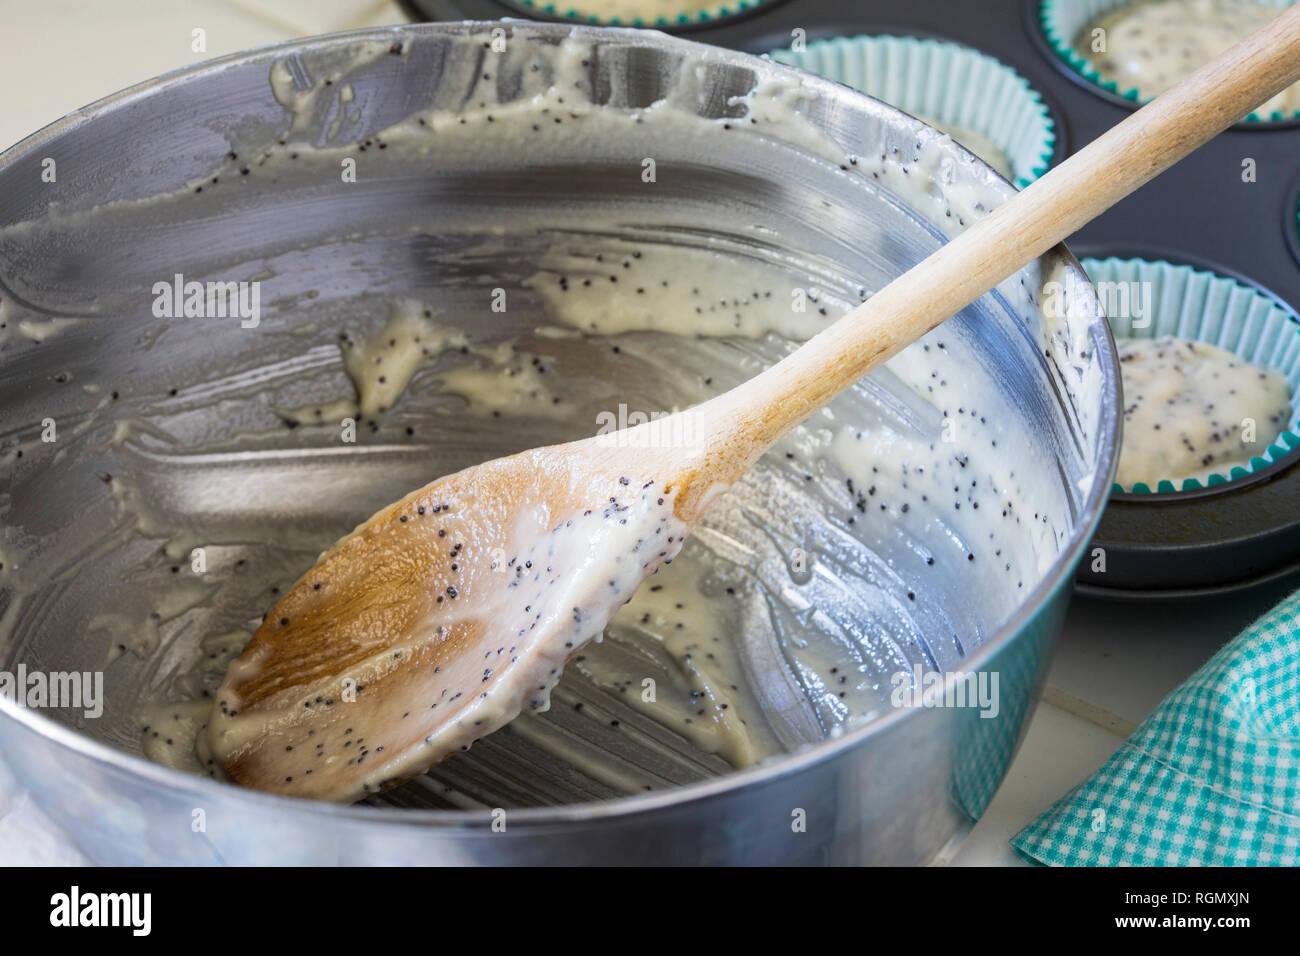 Metal mixing bowl with wooden spoon and batter from poppy seed muffins  Stock Photo - Alamy